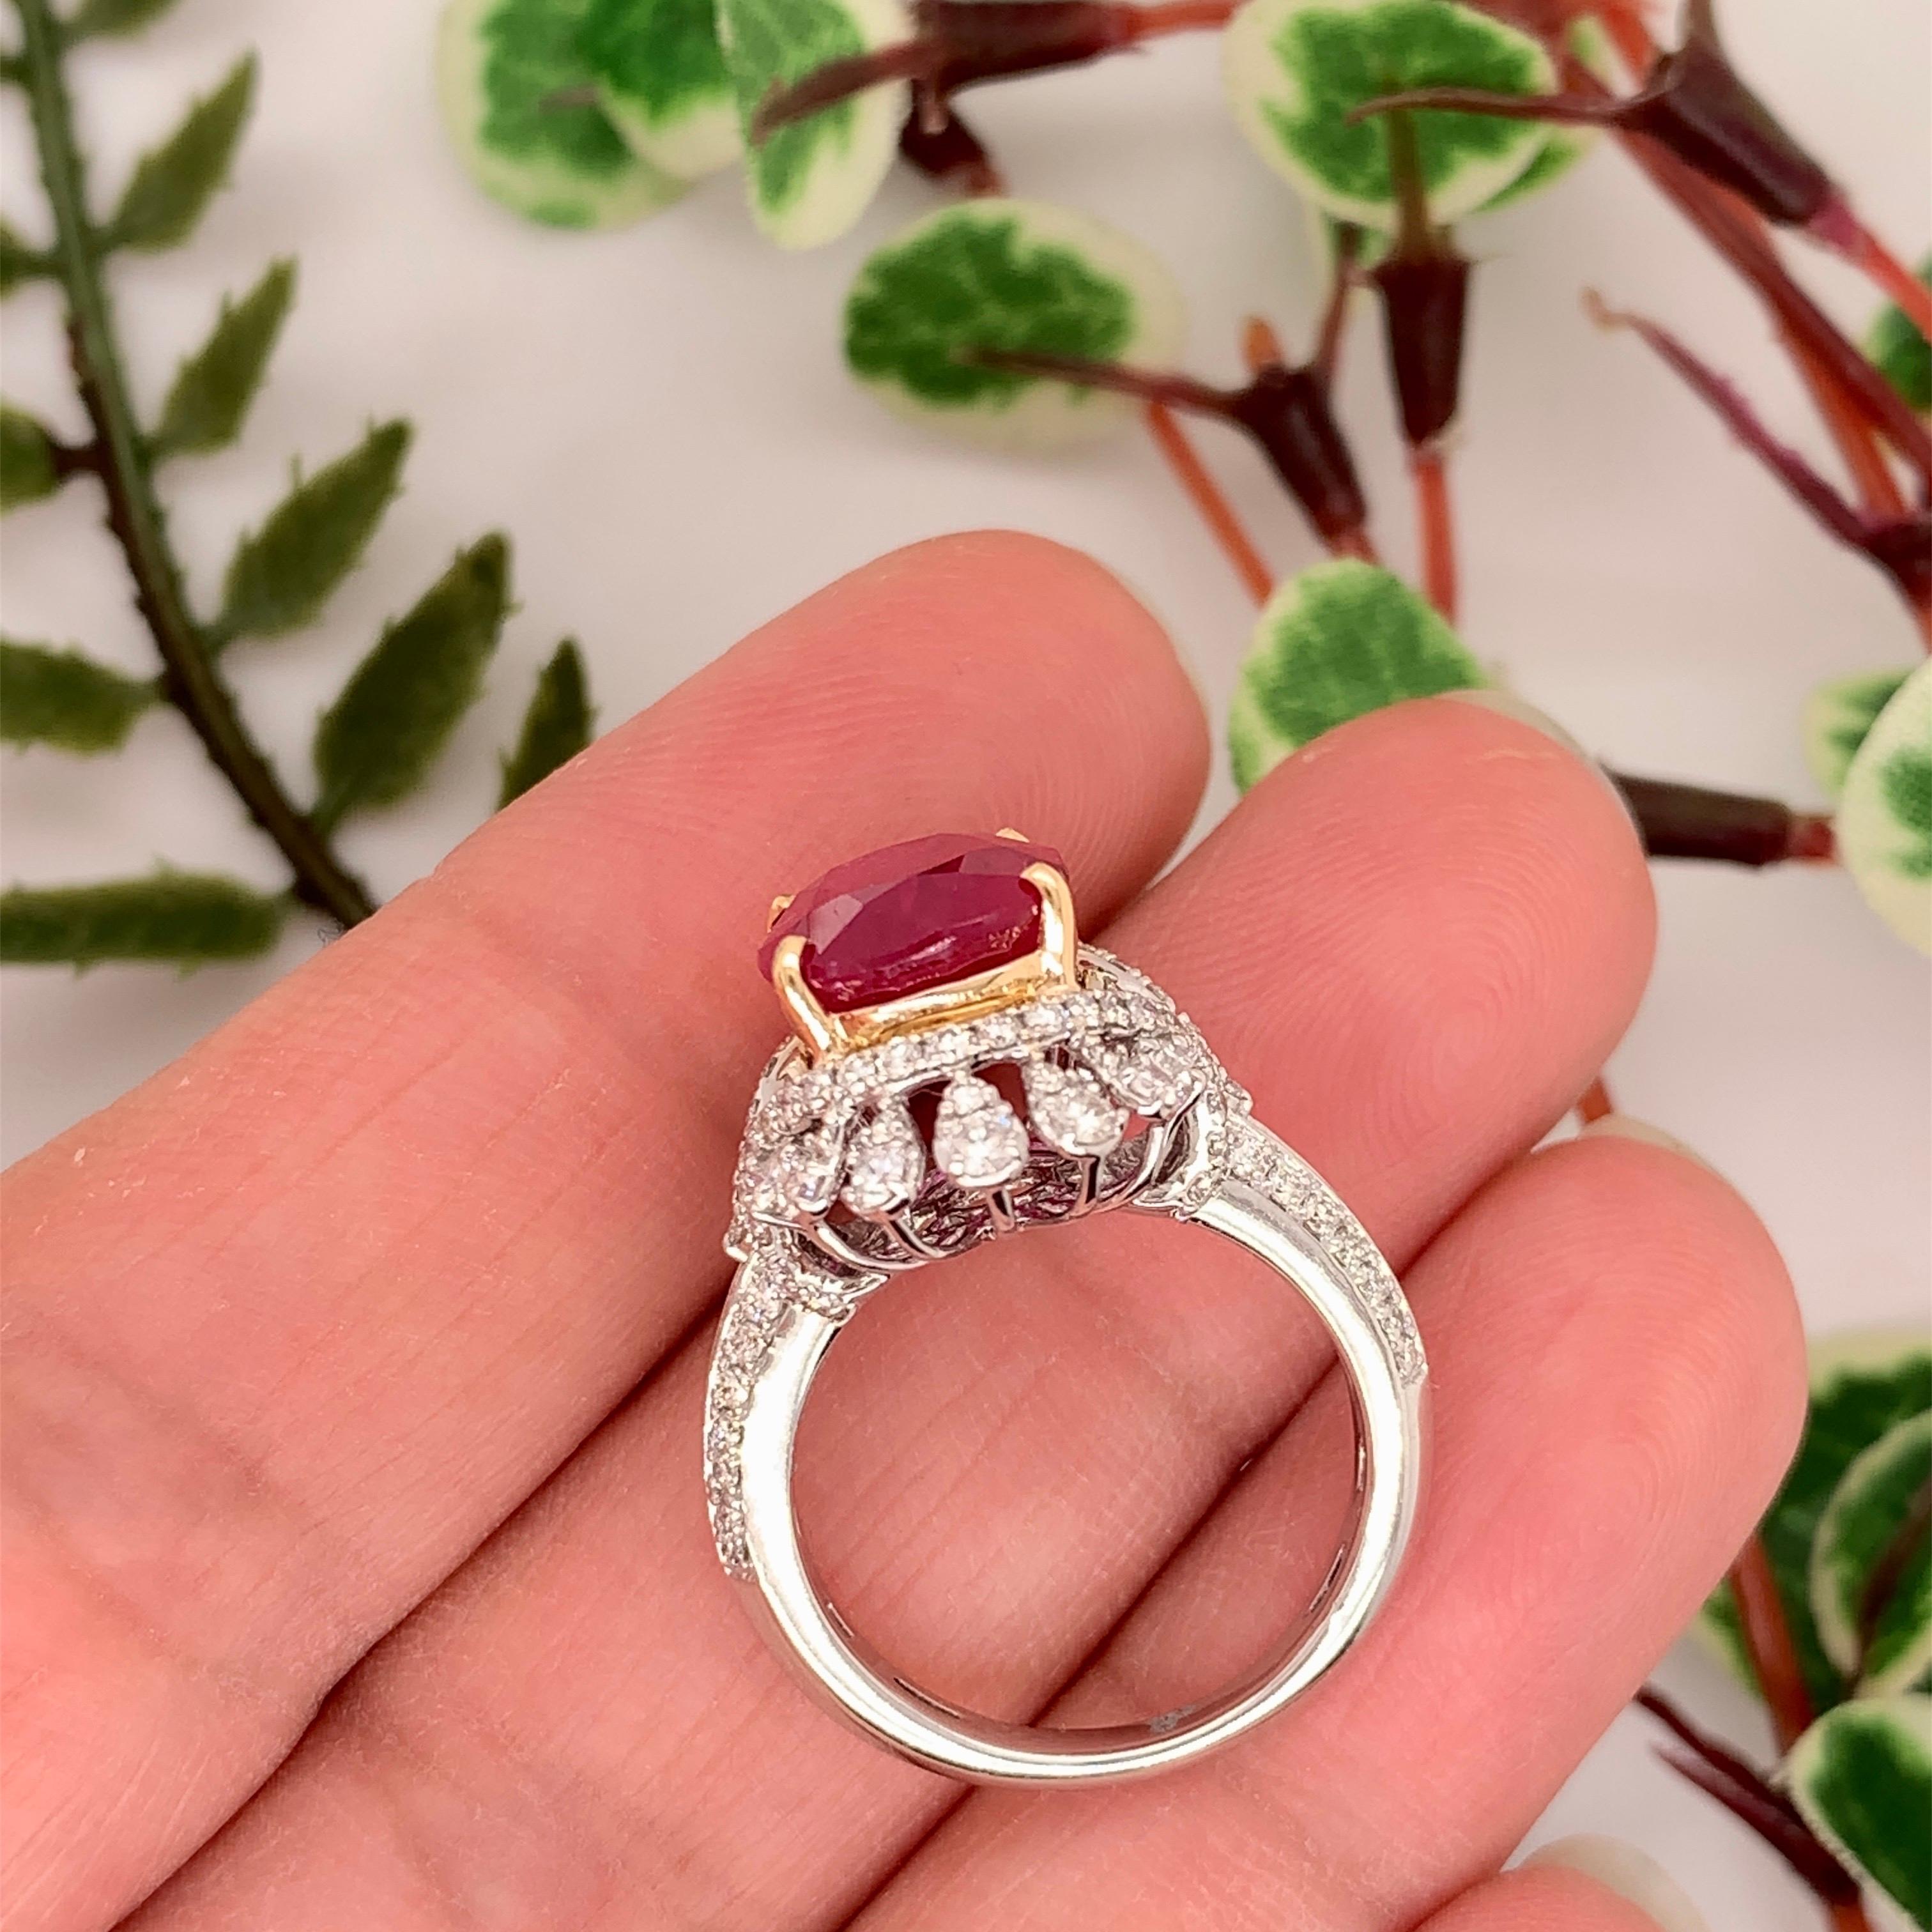 Women's or Men's 5.83 Carat Mozambique Ruby Cocktail Ring